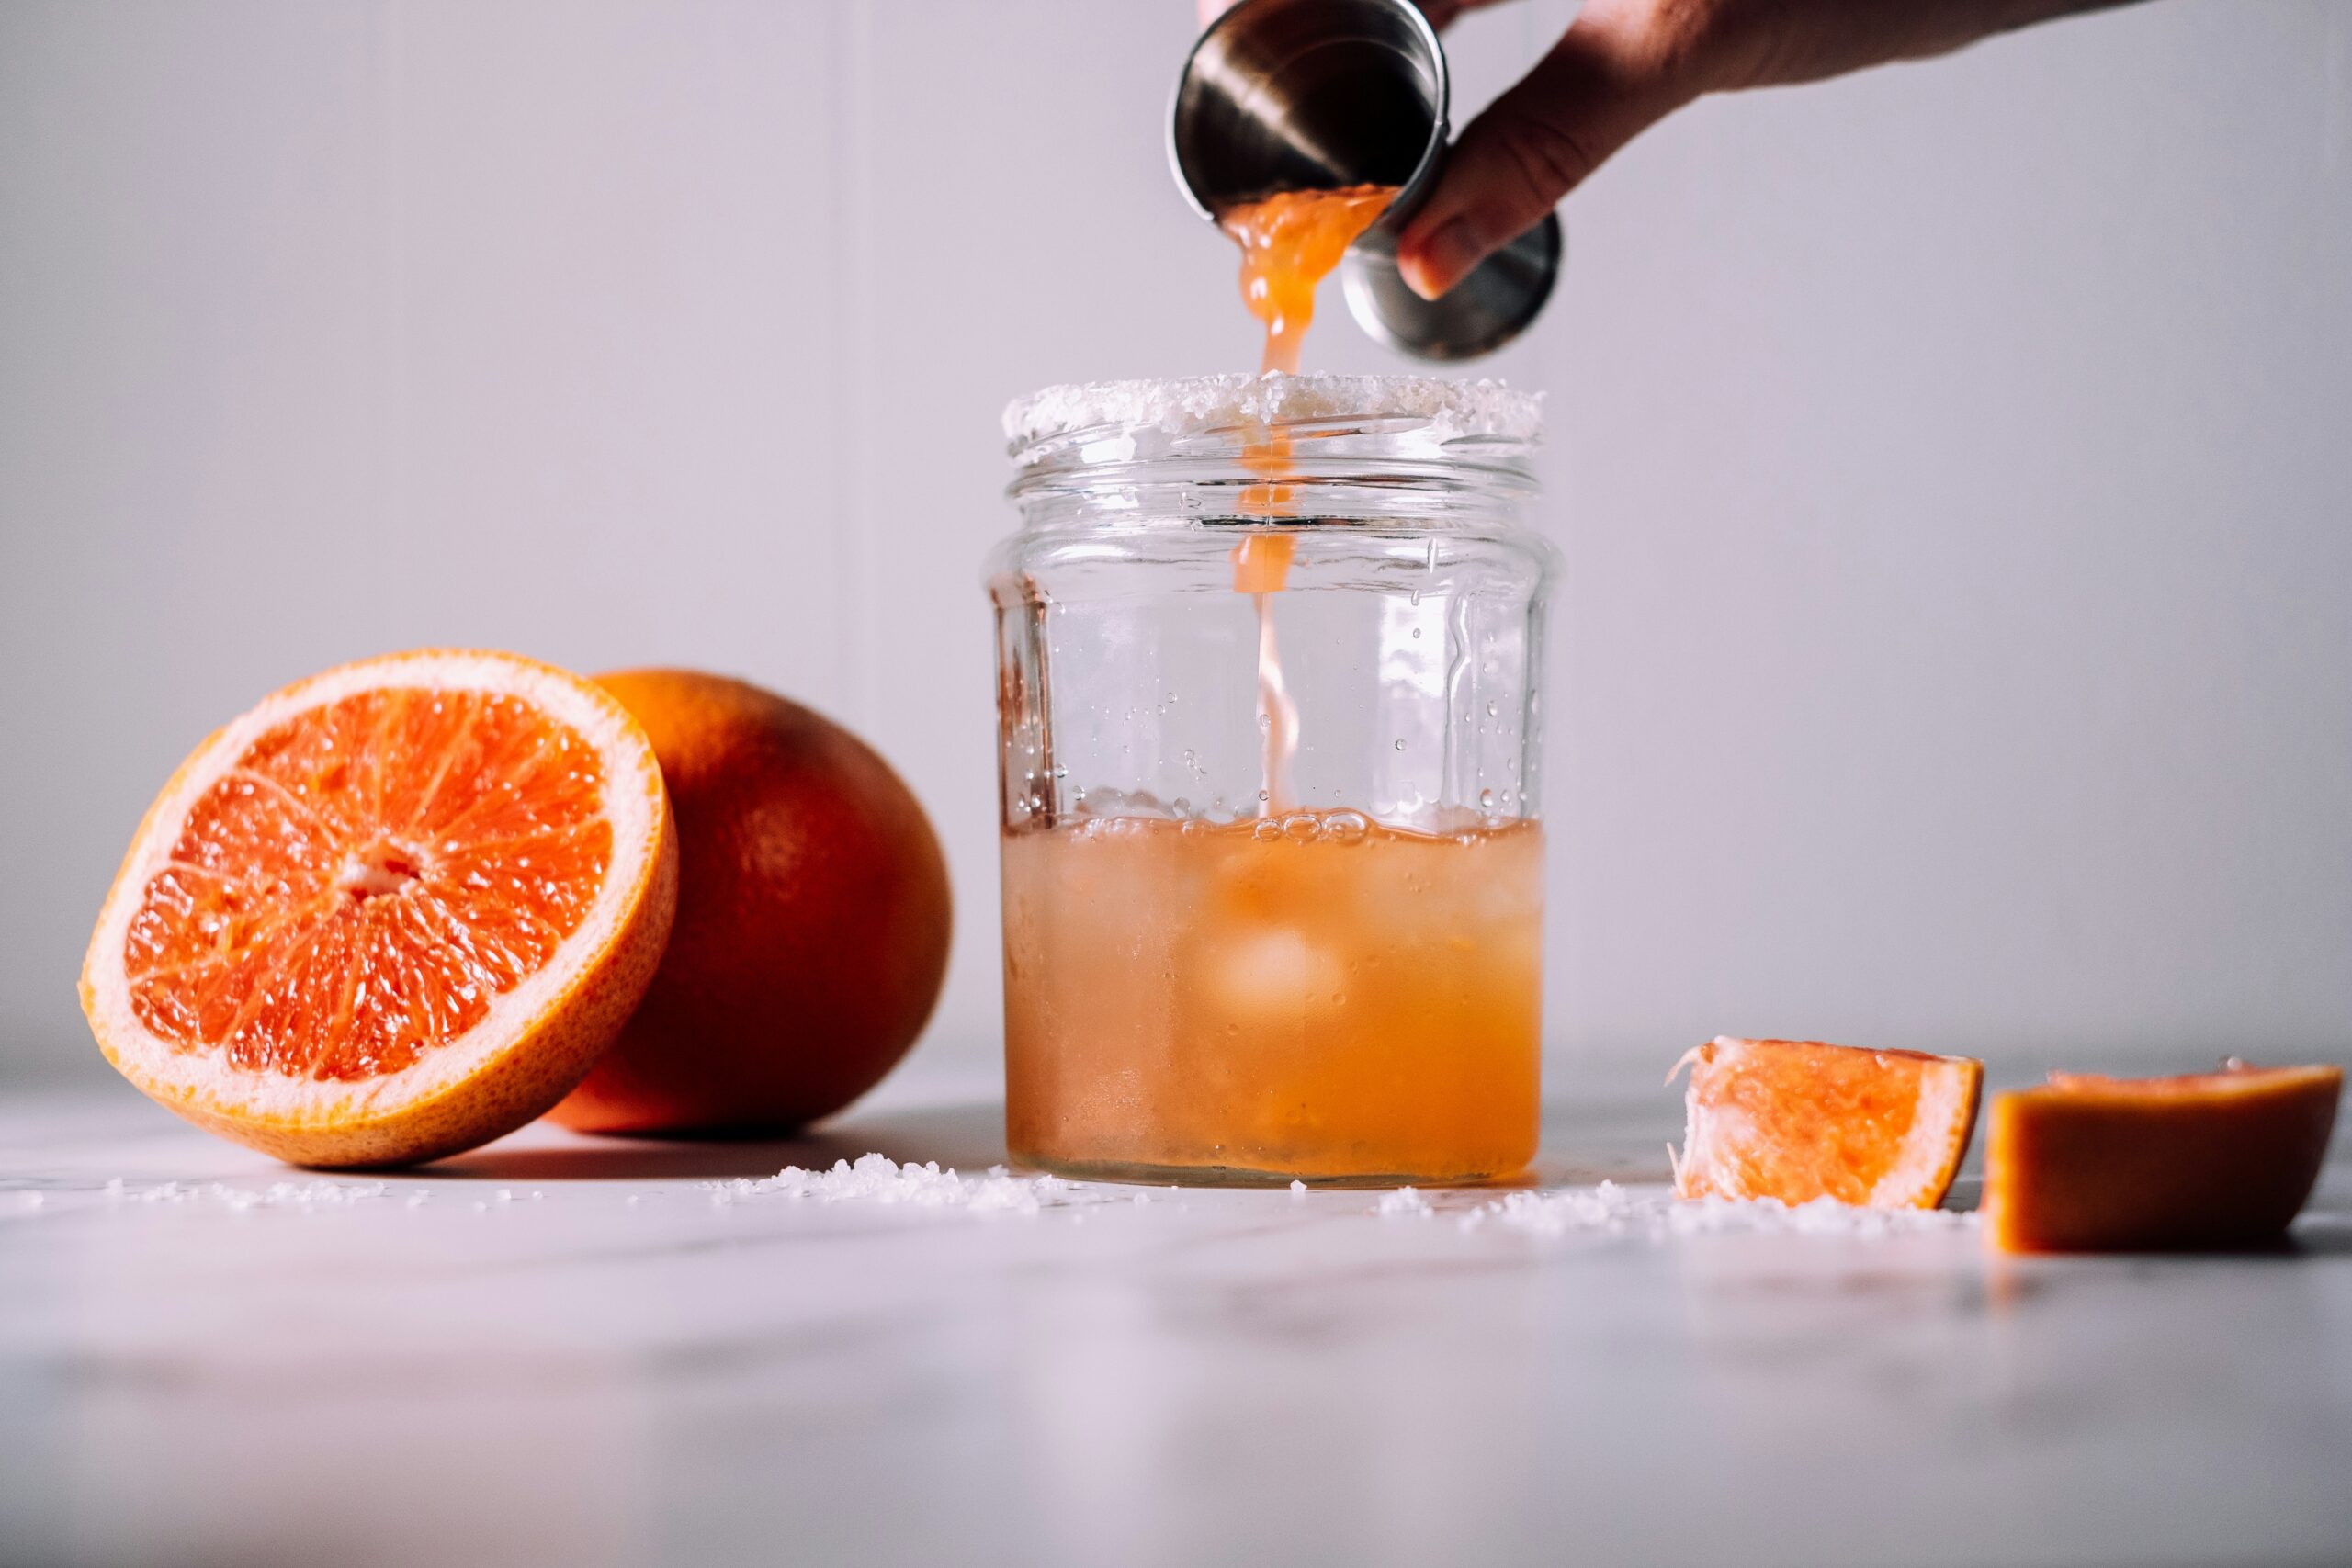 A different take on the regular cocktail, try making a blood orange adrenal cocktail. Pictured: Blood orange being poured into a glass